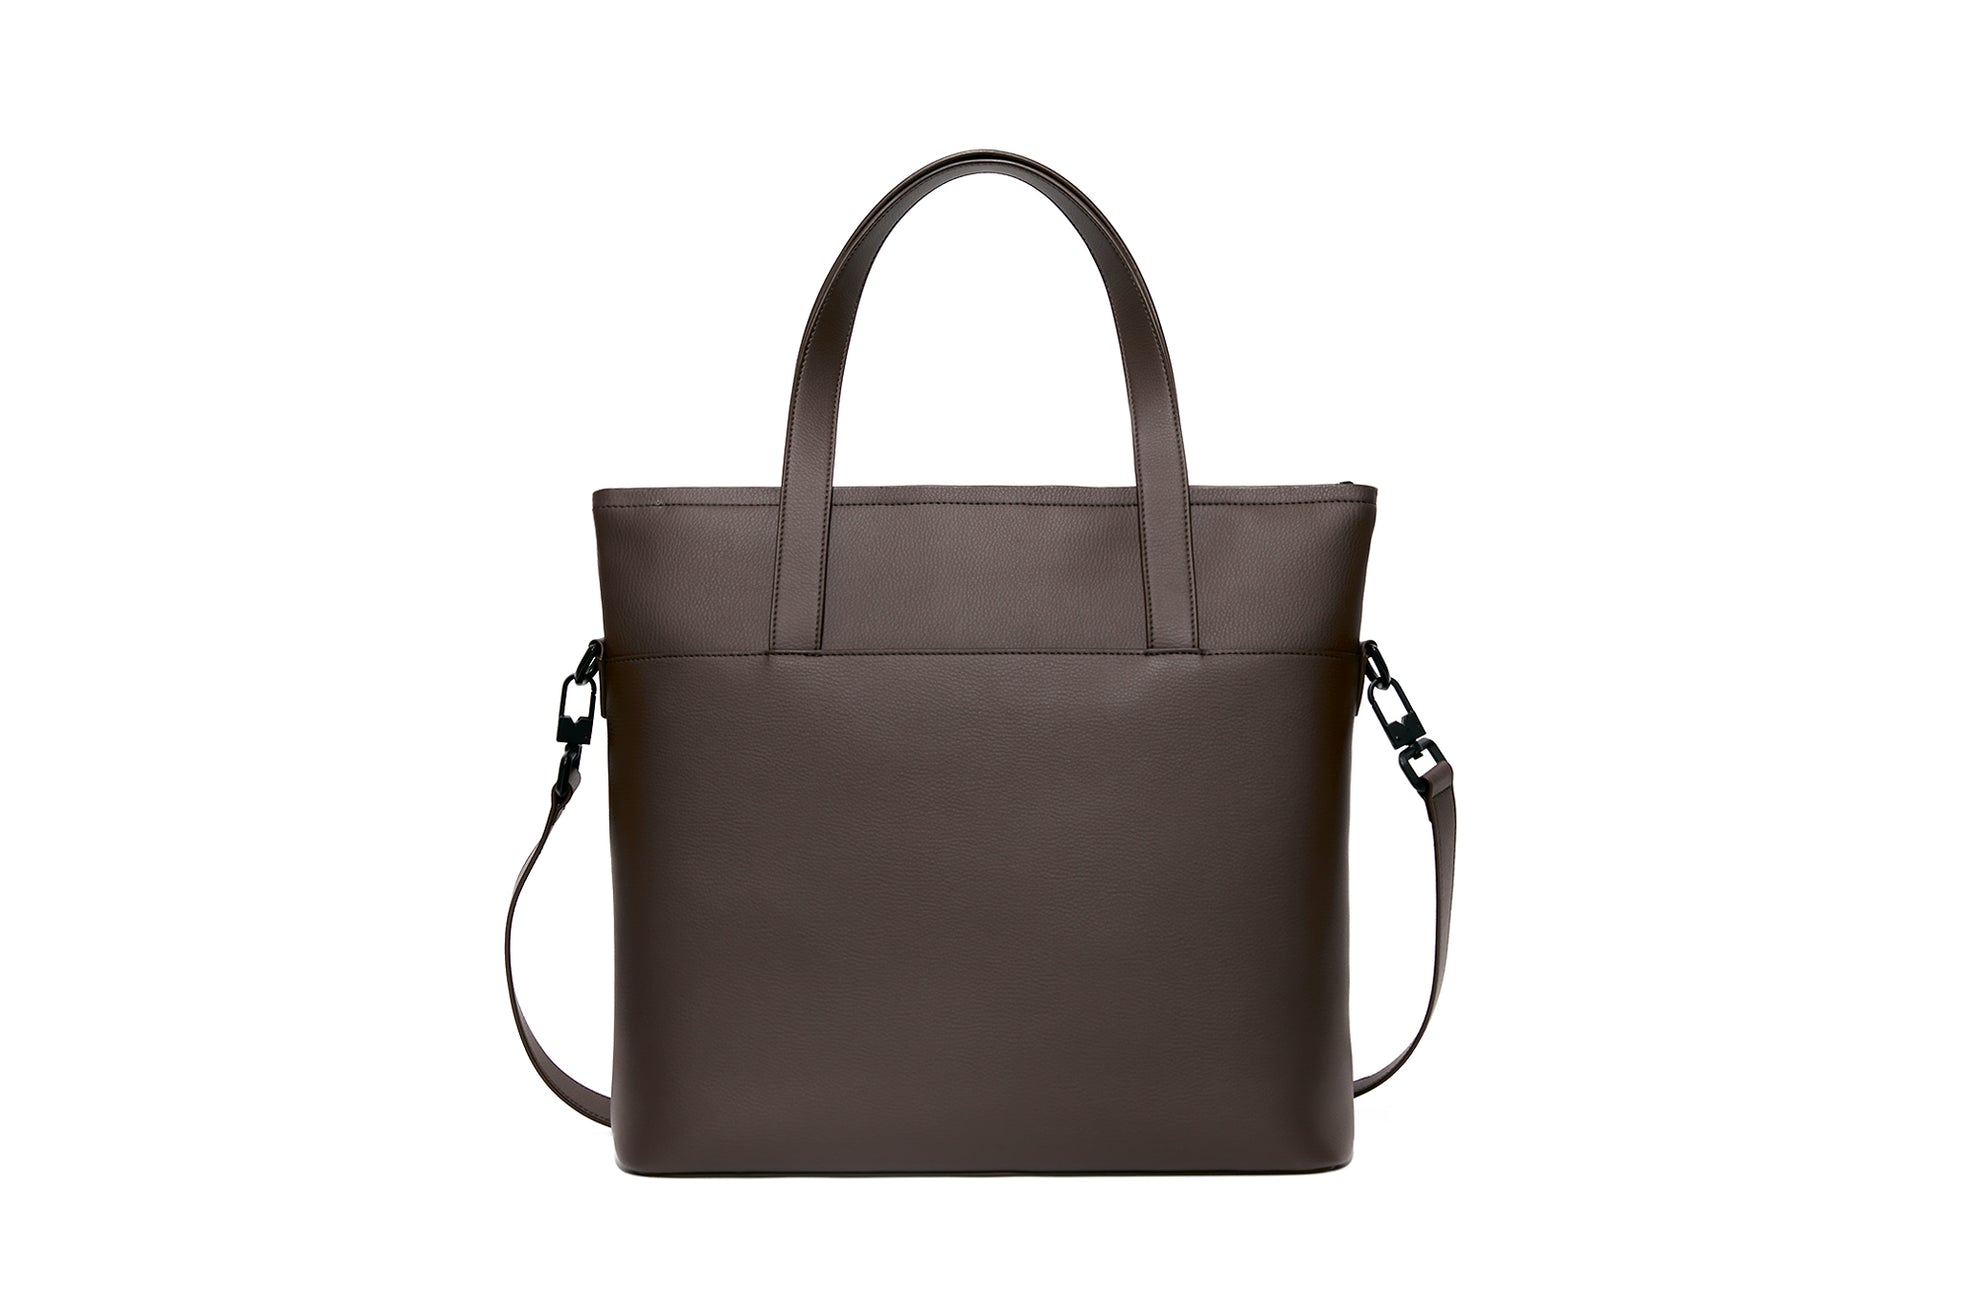 The Zipper Tote in Technik-Leather in Taupe image 3